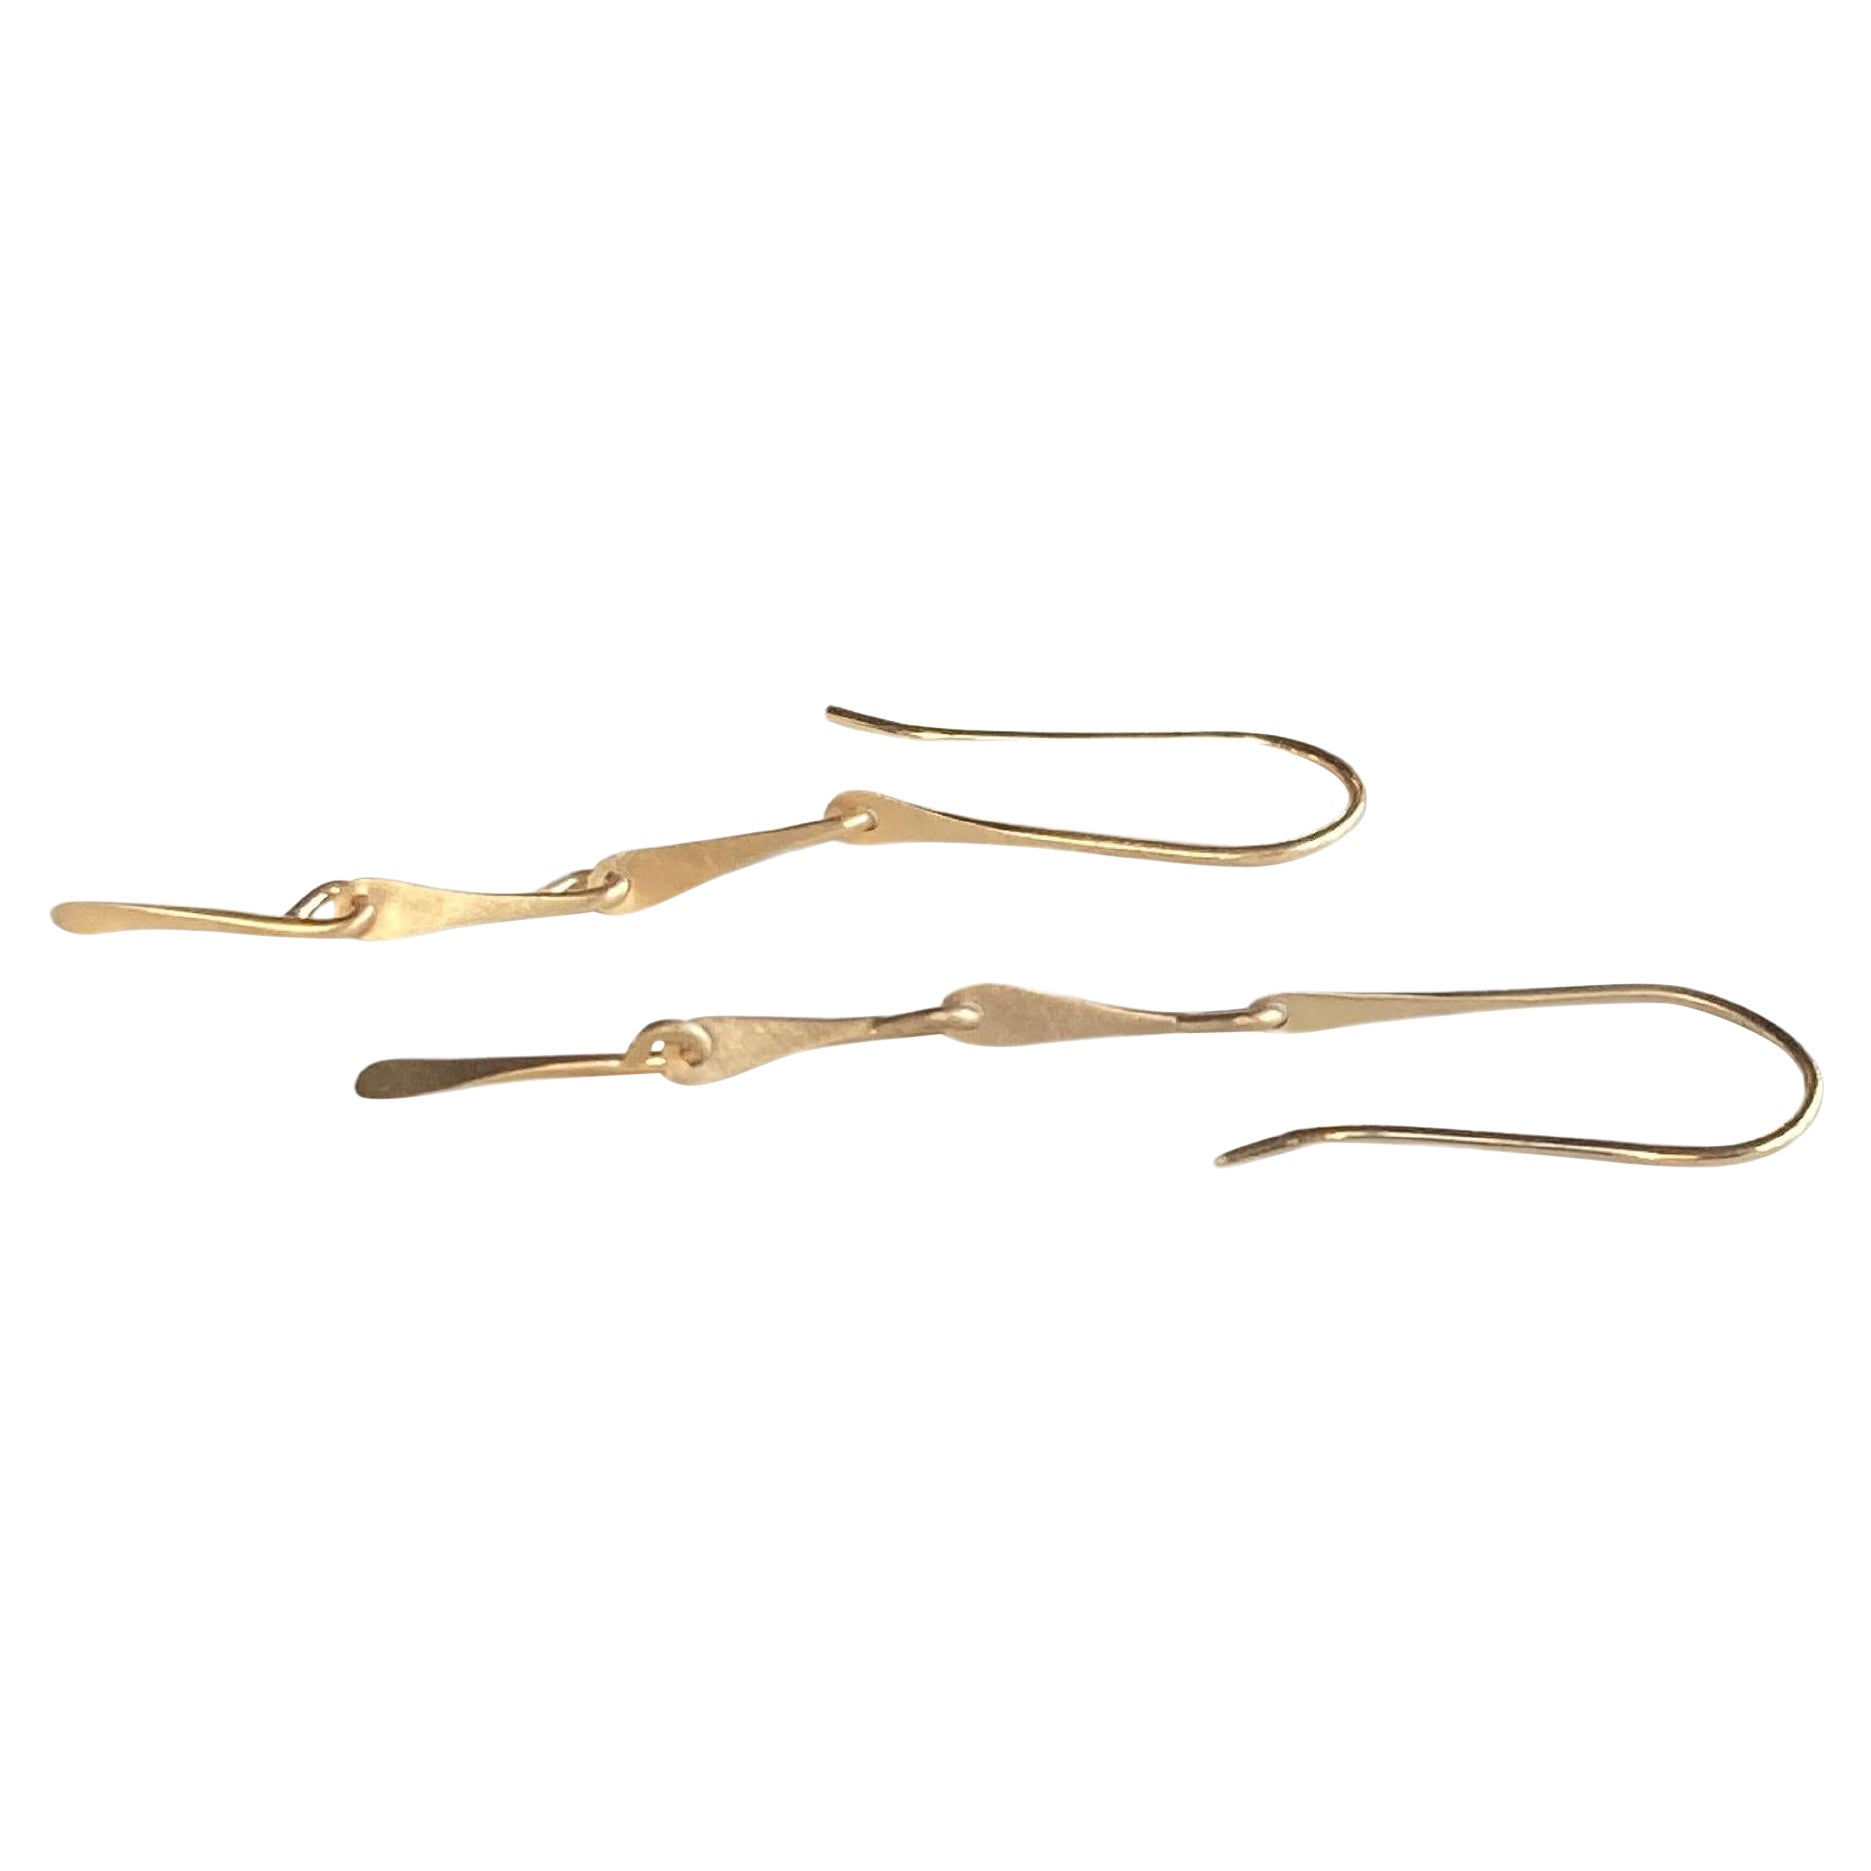 Solid yellow 9ct Gold Tarsus earrings- Shorter length